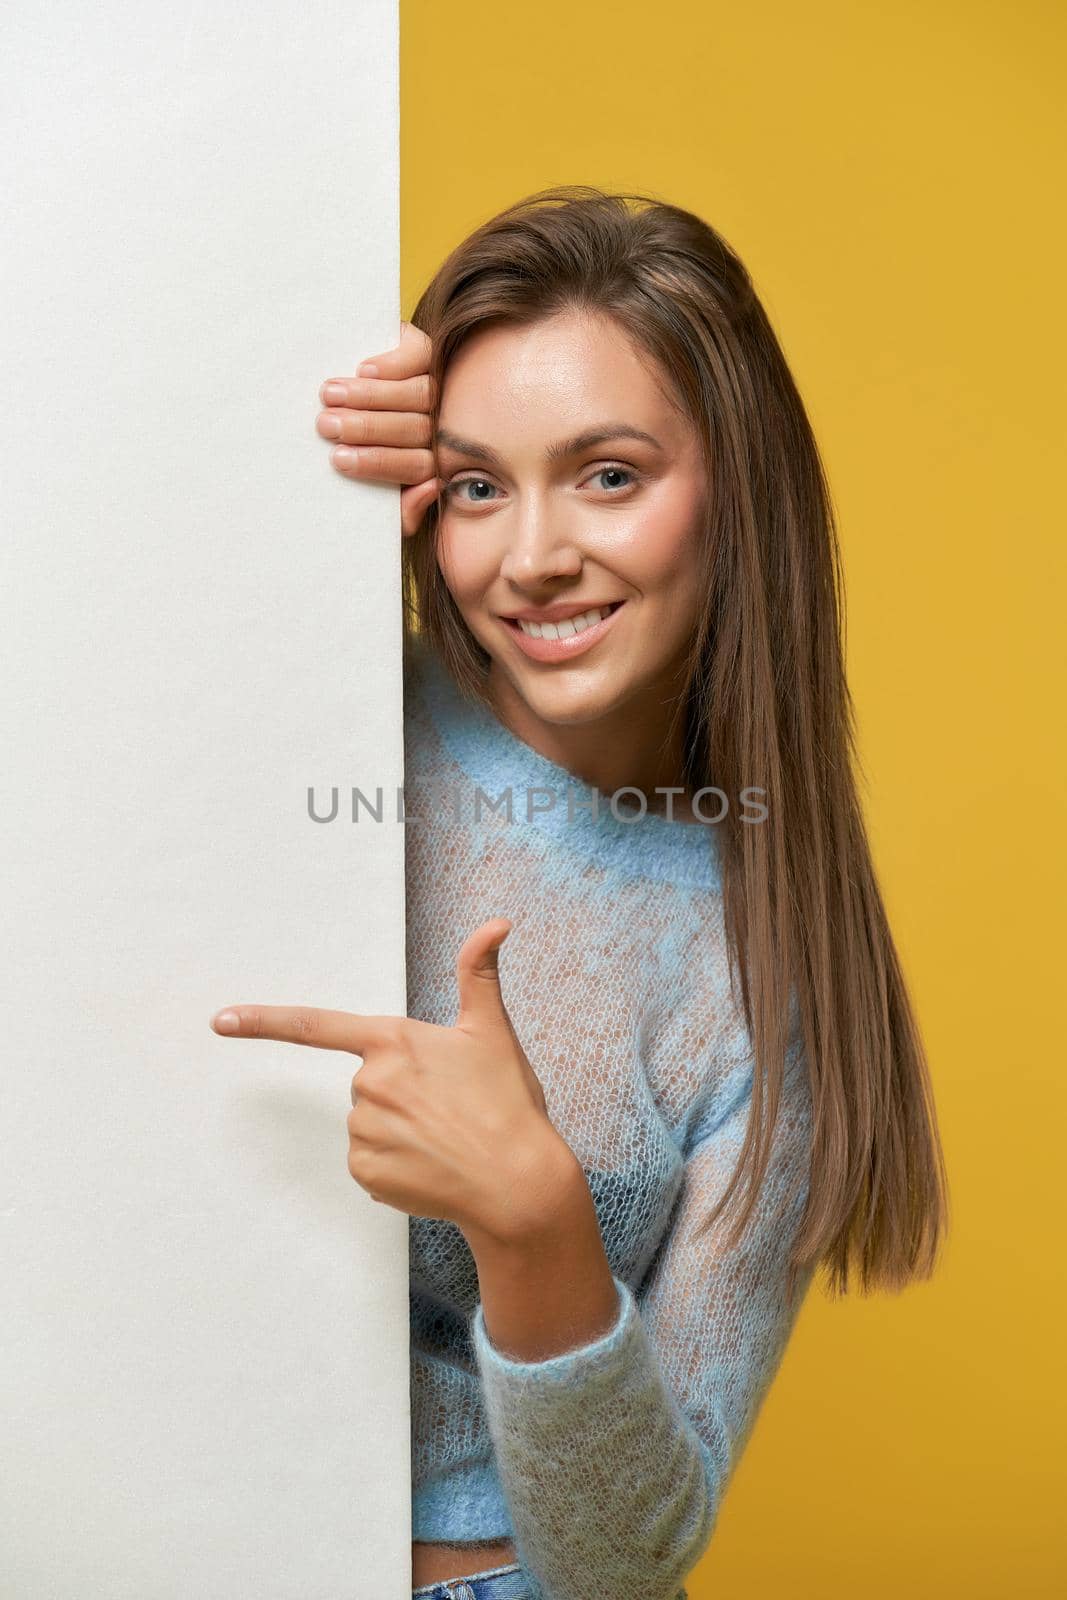 Front view of smiling pretty girl with long brown hair peeping out of white poster, pointing at poster looking at camera wearing jeans.